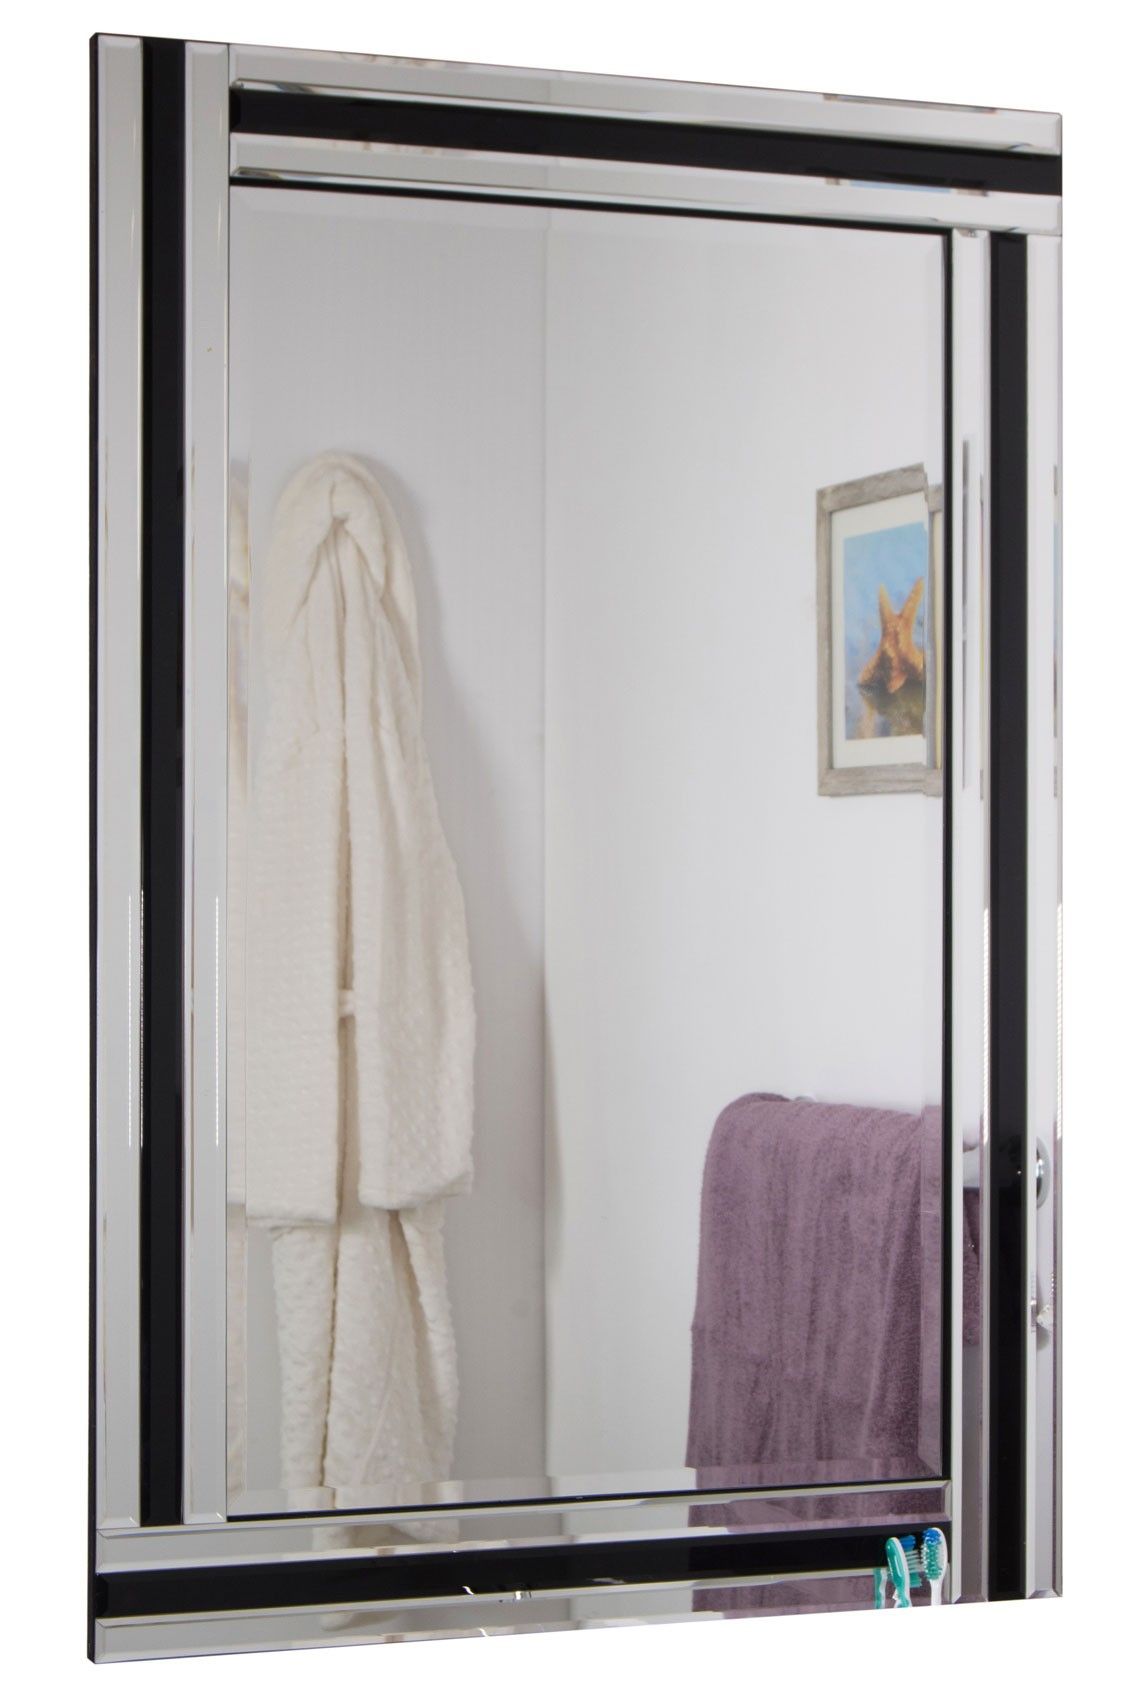 Large Black And Silver Triple Edge Bathroom Wall Mirror 1ft11 X 2ft11 With Smoke Edge Wall Mirrors (View 7 of 15)